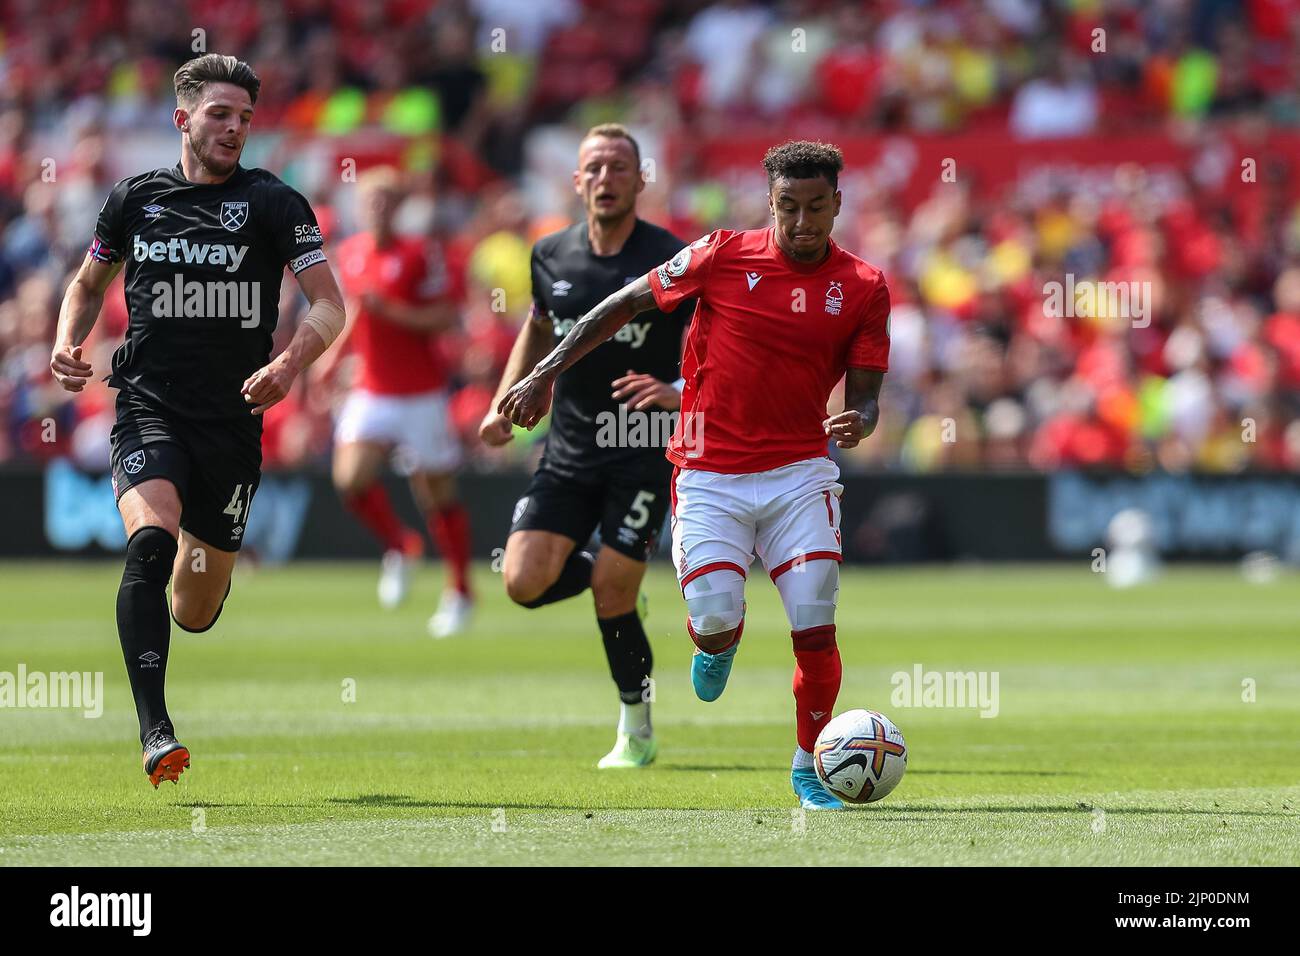 Jesse Lingard #11 of Nottingham Forest runs with the ball Stock Photo